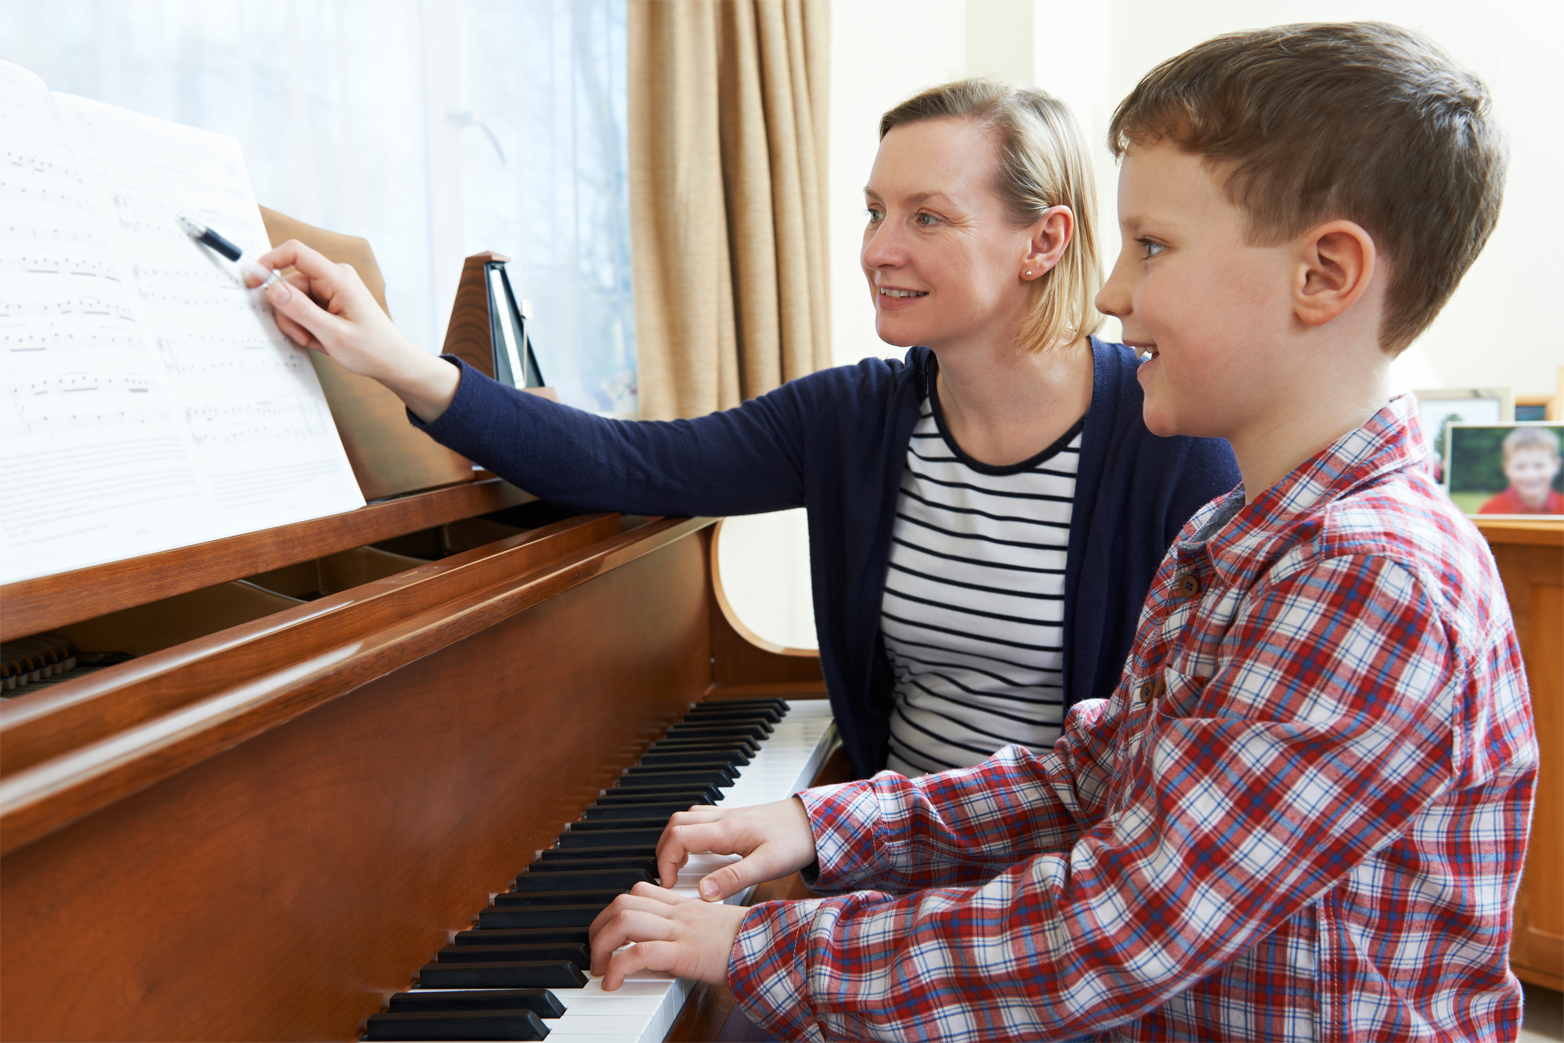 8 Thing You Need to Know Before Starting Music Lessons